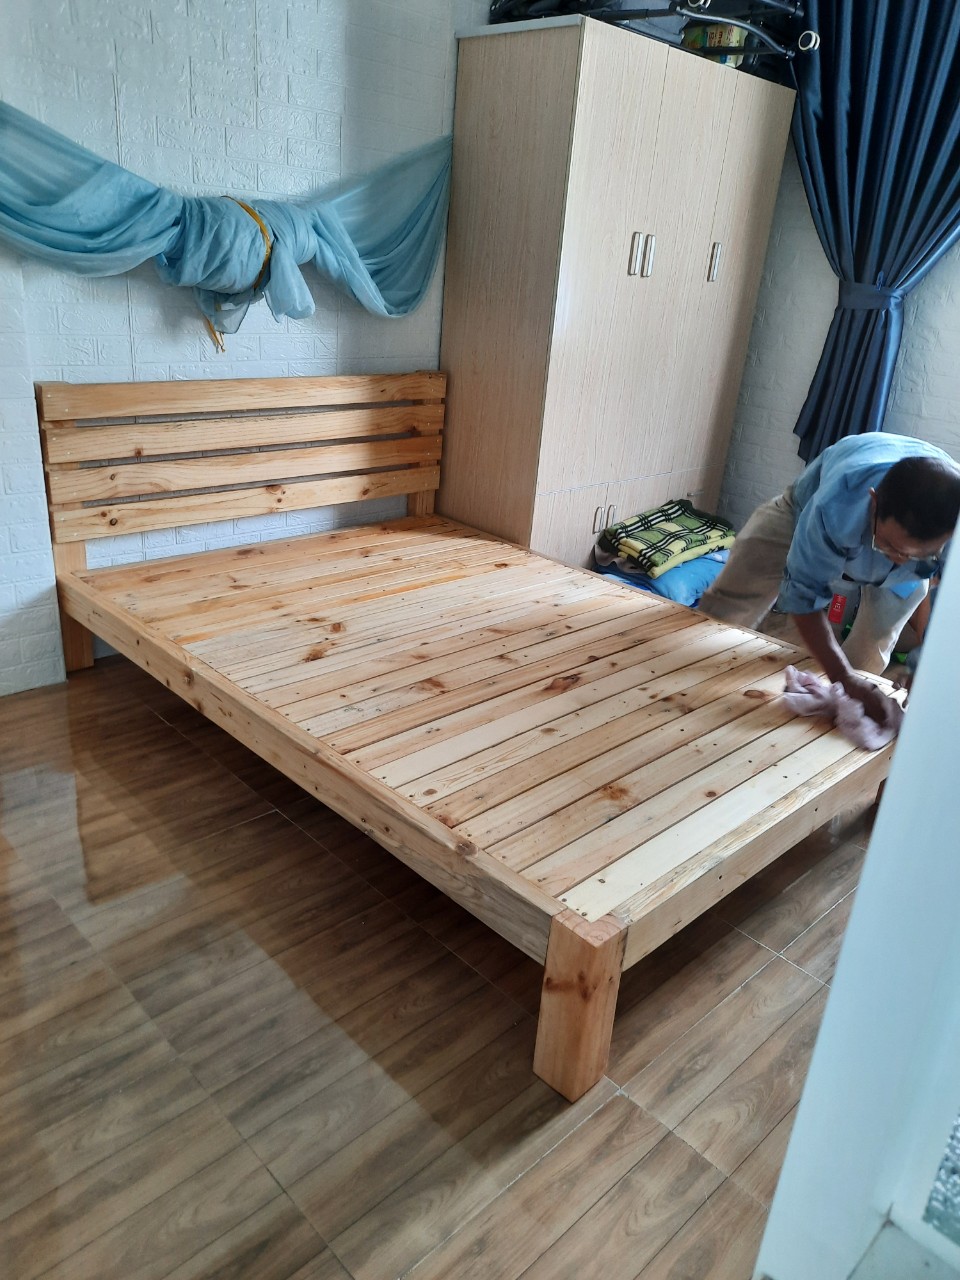 WHAT THE BEAUTIFUL GIƯỜNG PALLET BED IN NHA TRANG CITY